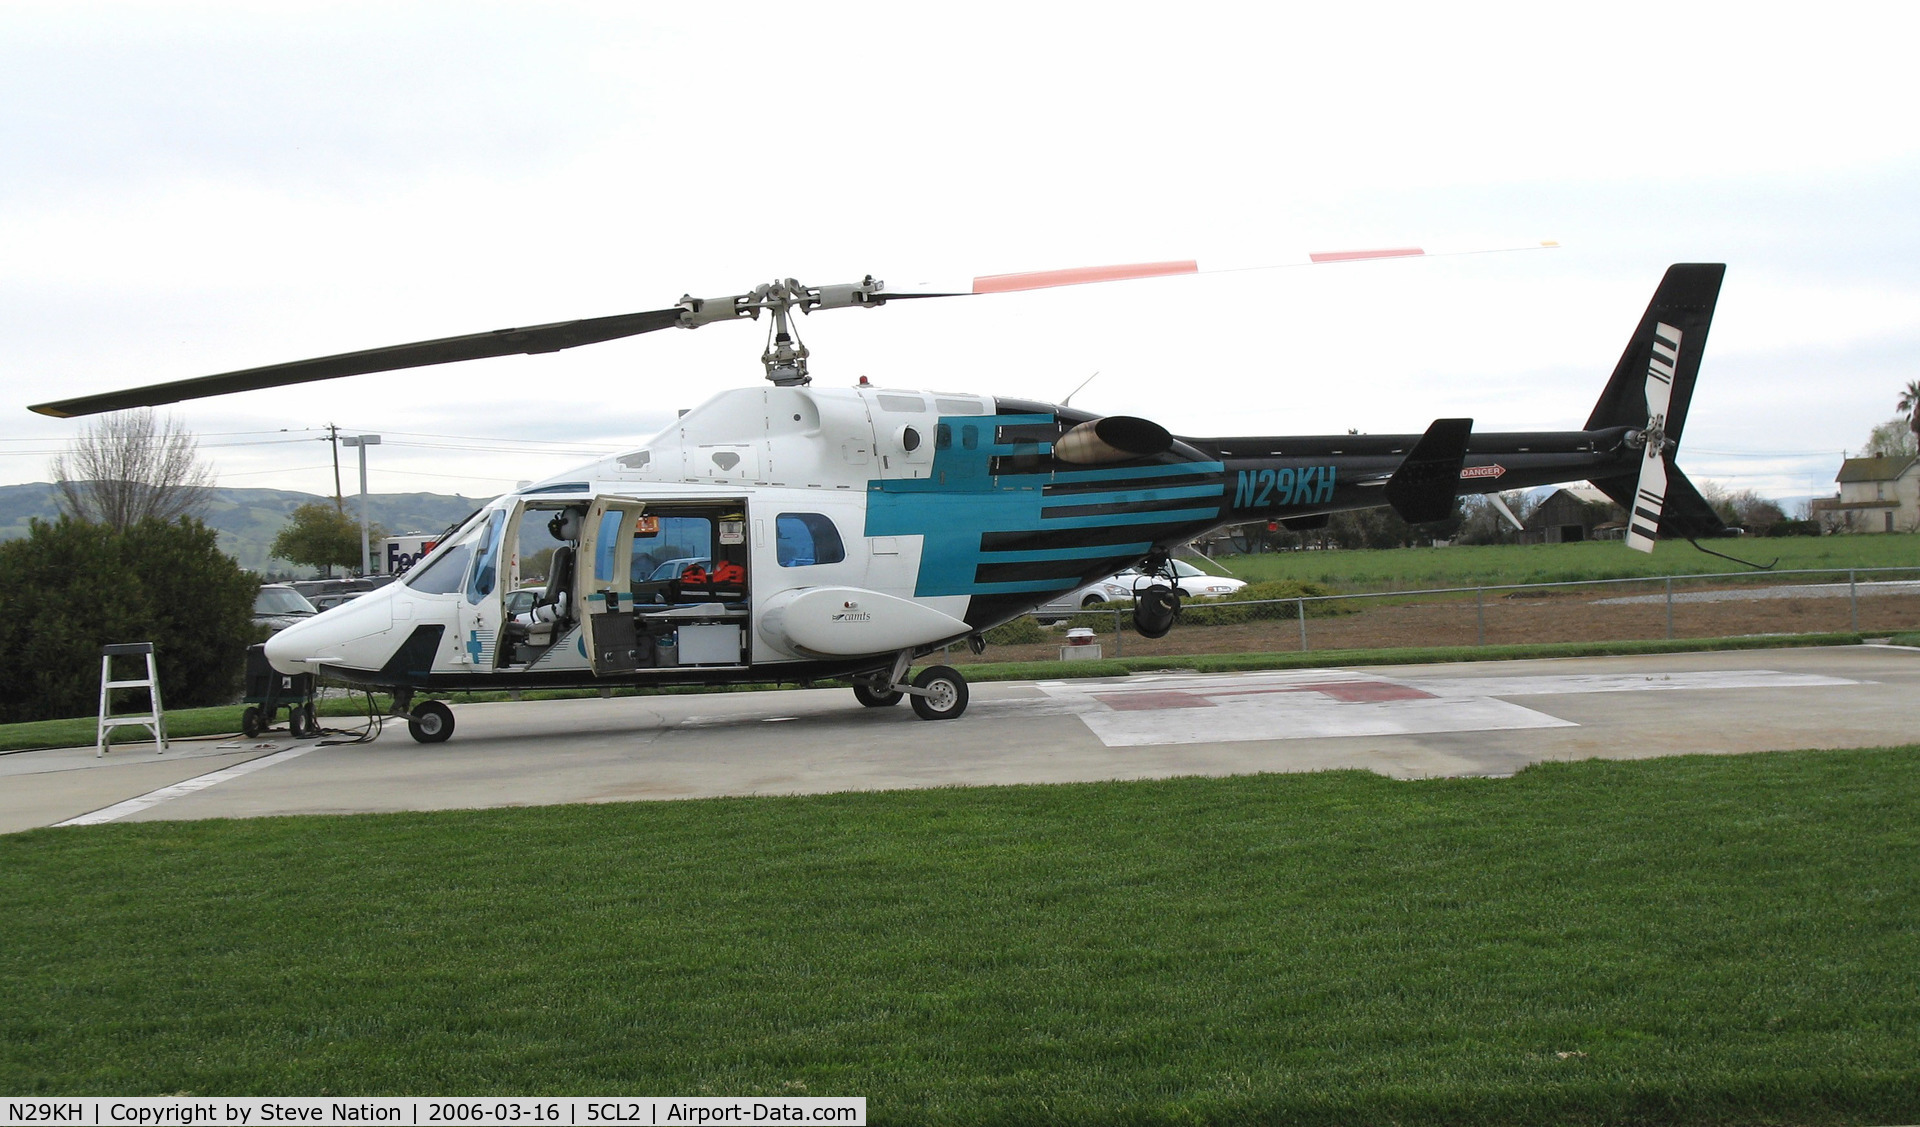 N29KH, 1981 Bell 222 C/N 47053, CALSTAR 1981 Bell 222 with doors open on standby @ St. Louise Regional Hospital Heliport, Gilroy, CA